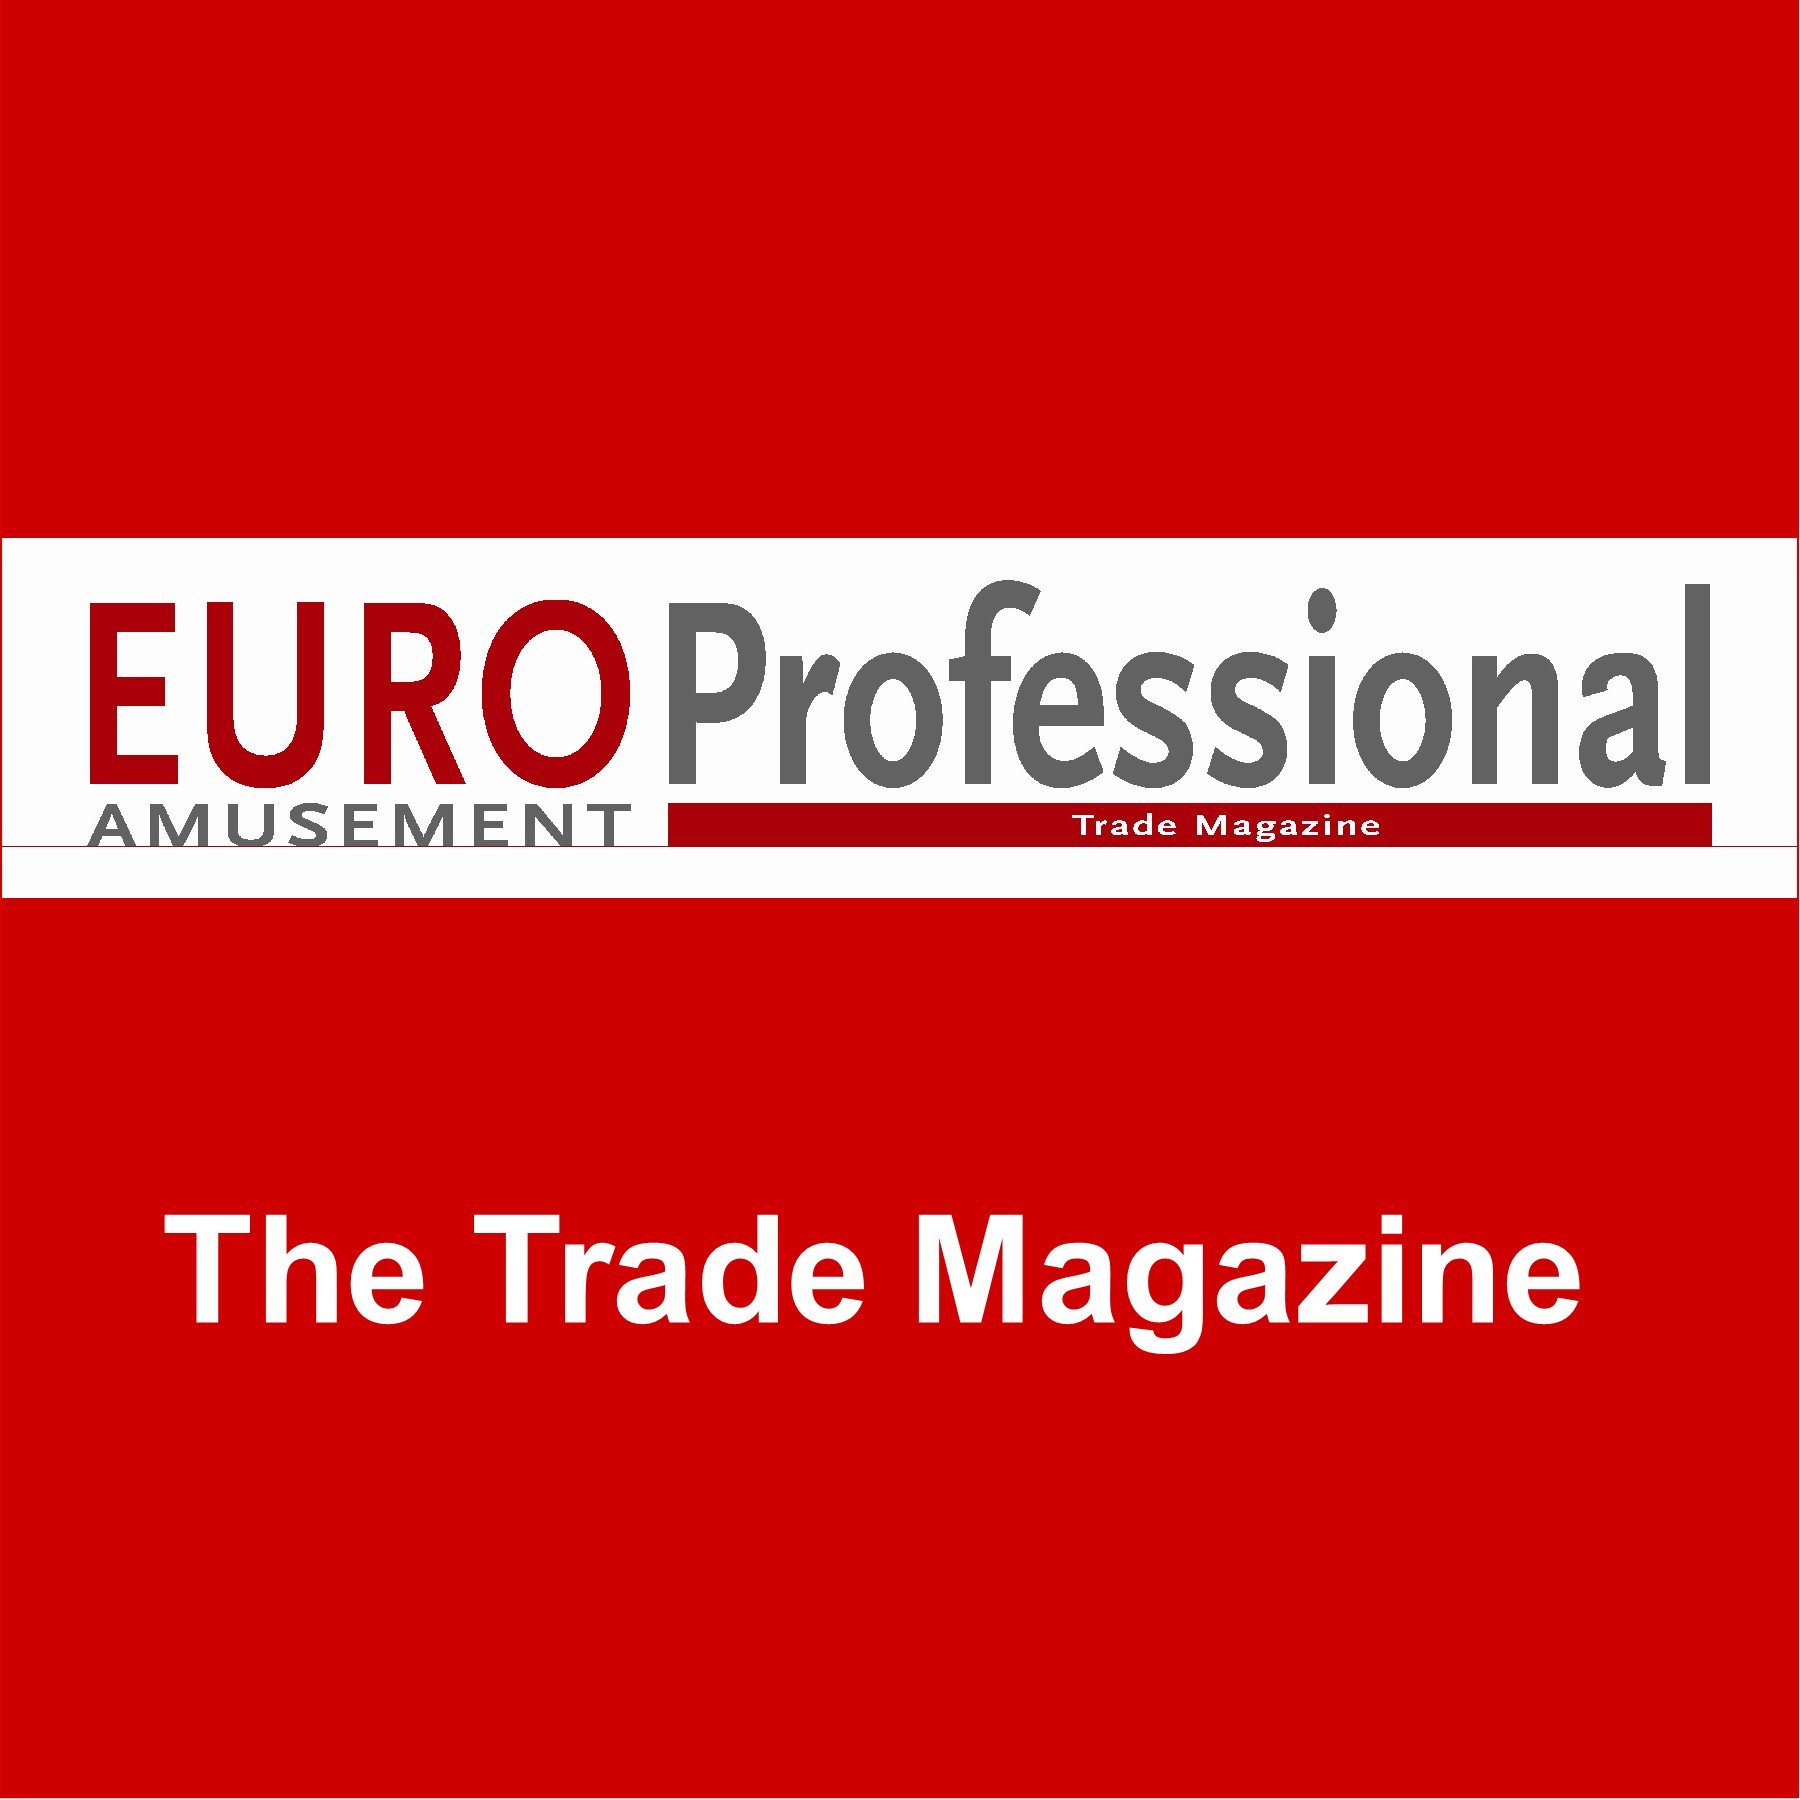 EuroAmusement Professional (EAP) Trade Magazine is the bilingual source for the European leisure and attractions industry.